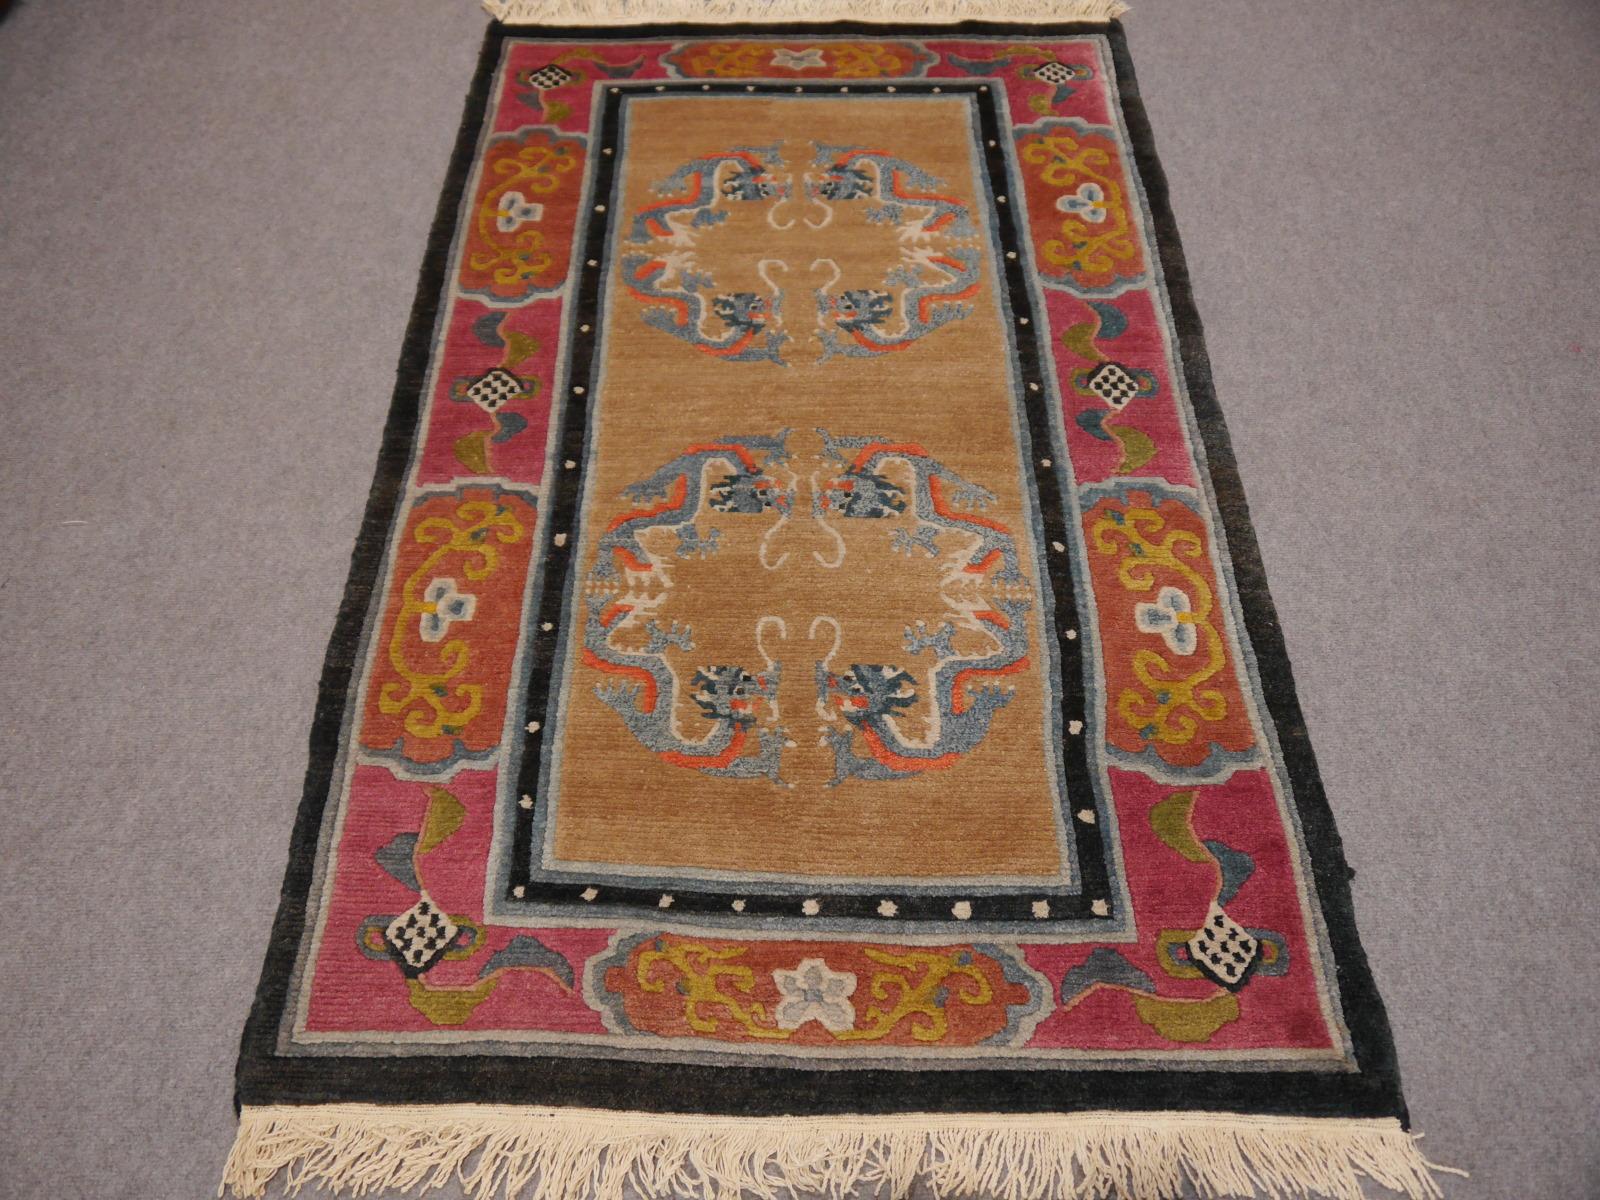 Vintage hand-knotted Tibetan meditation rug

This beautiful Tibetan rug was hand knotted using hand spun Tibetan highland wool - one of the finest wools available from sheep living above 9000 ft altitude. The size of the rug is traditional - these